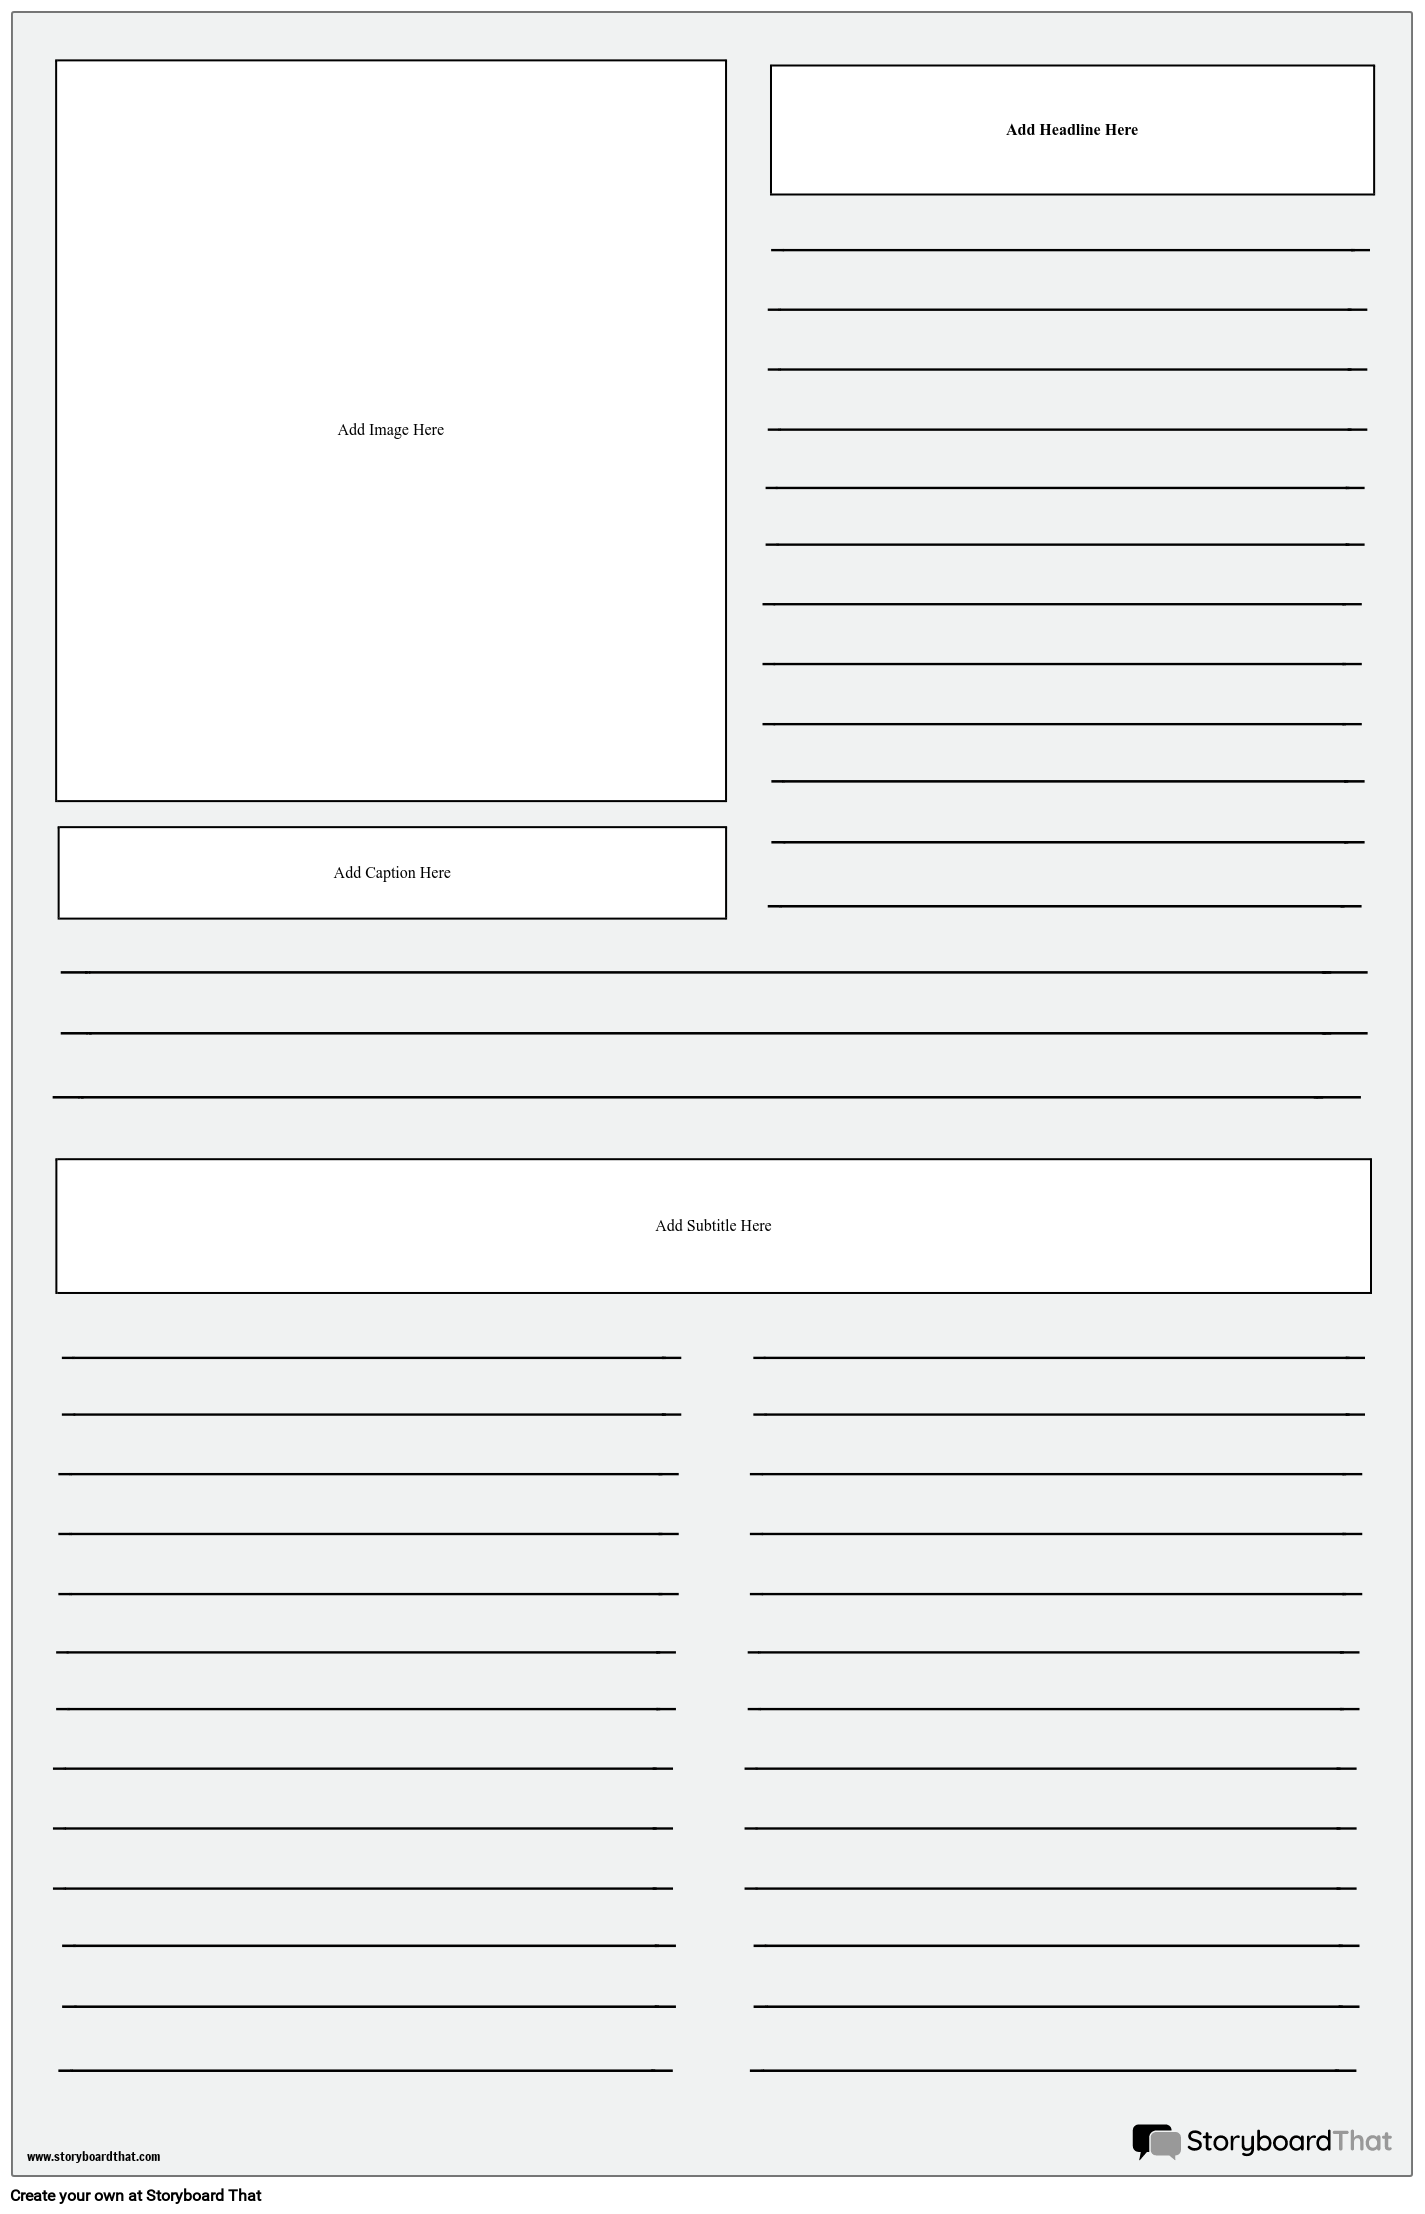 Page 3 - Free and customizable white background templates